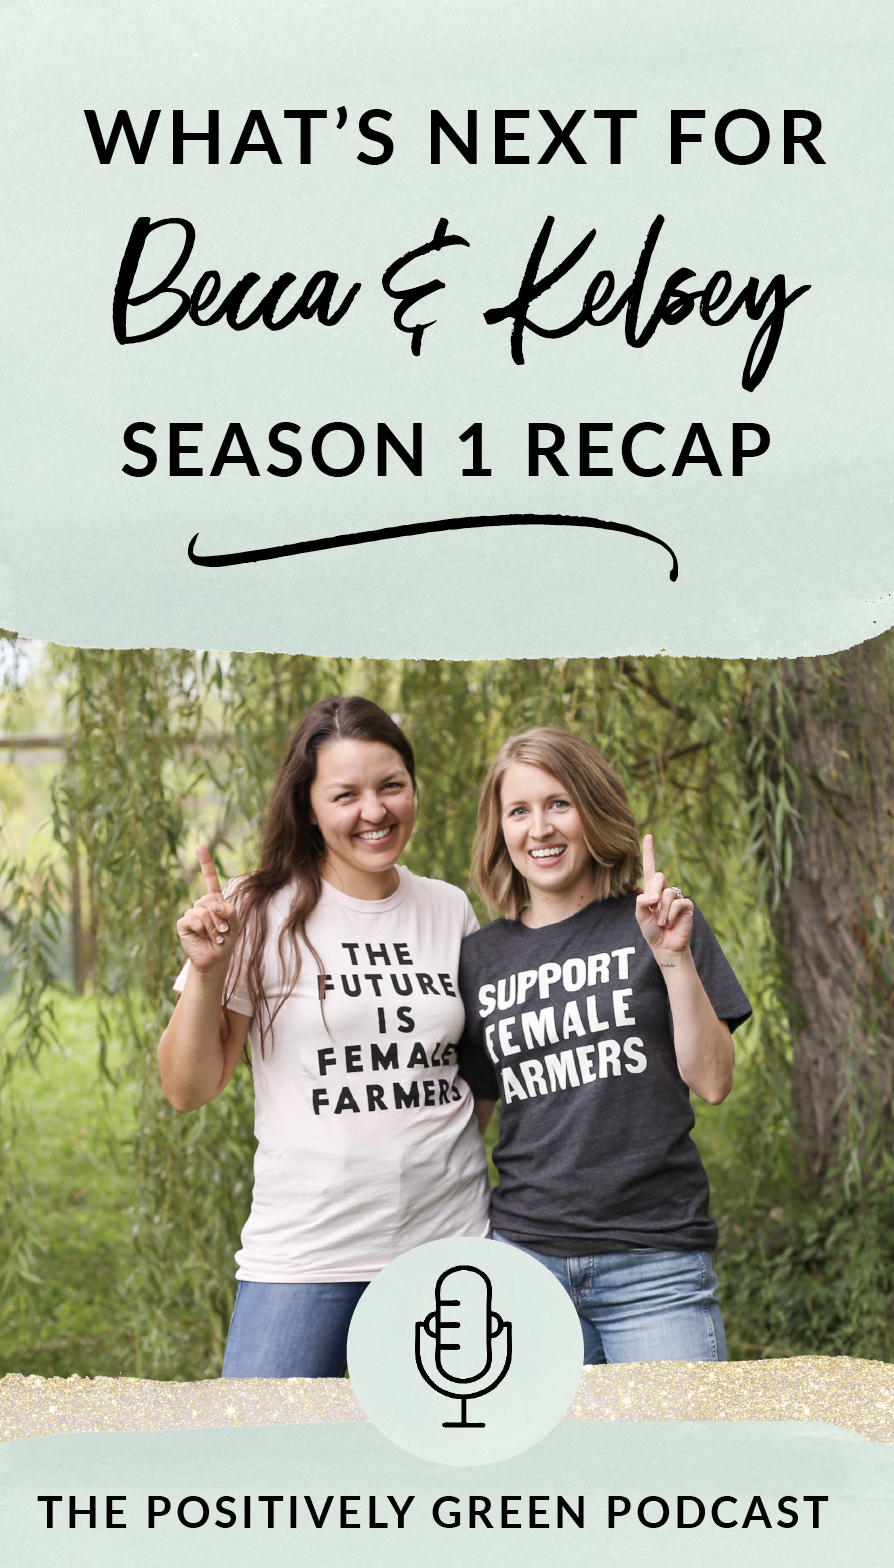 Episode 24 The Positively Green Podcast, what's next for Becca and Kelsey and a Season 1 Recap